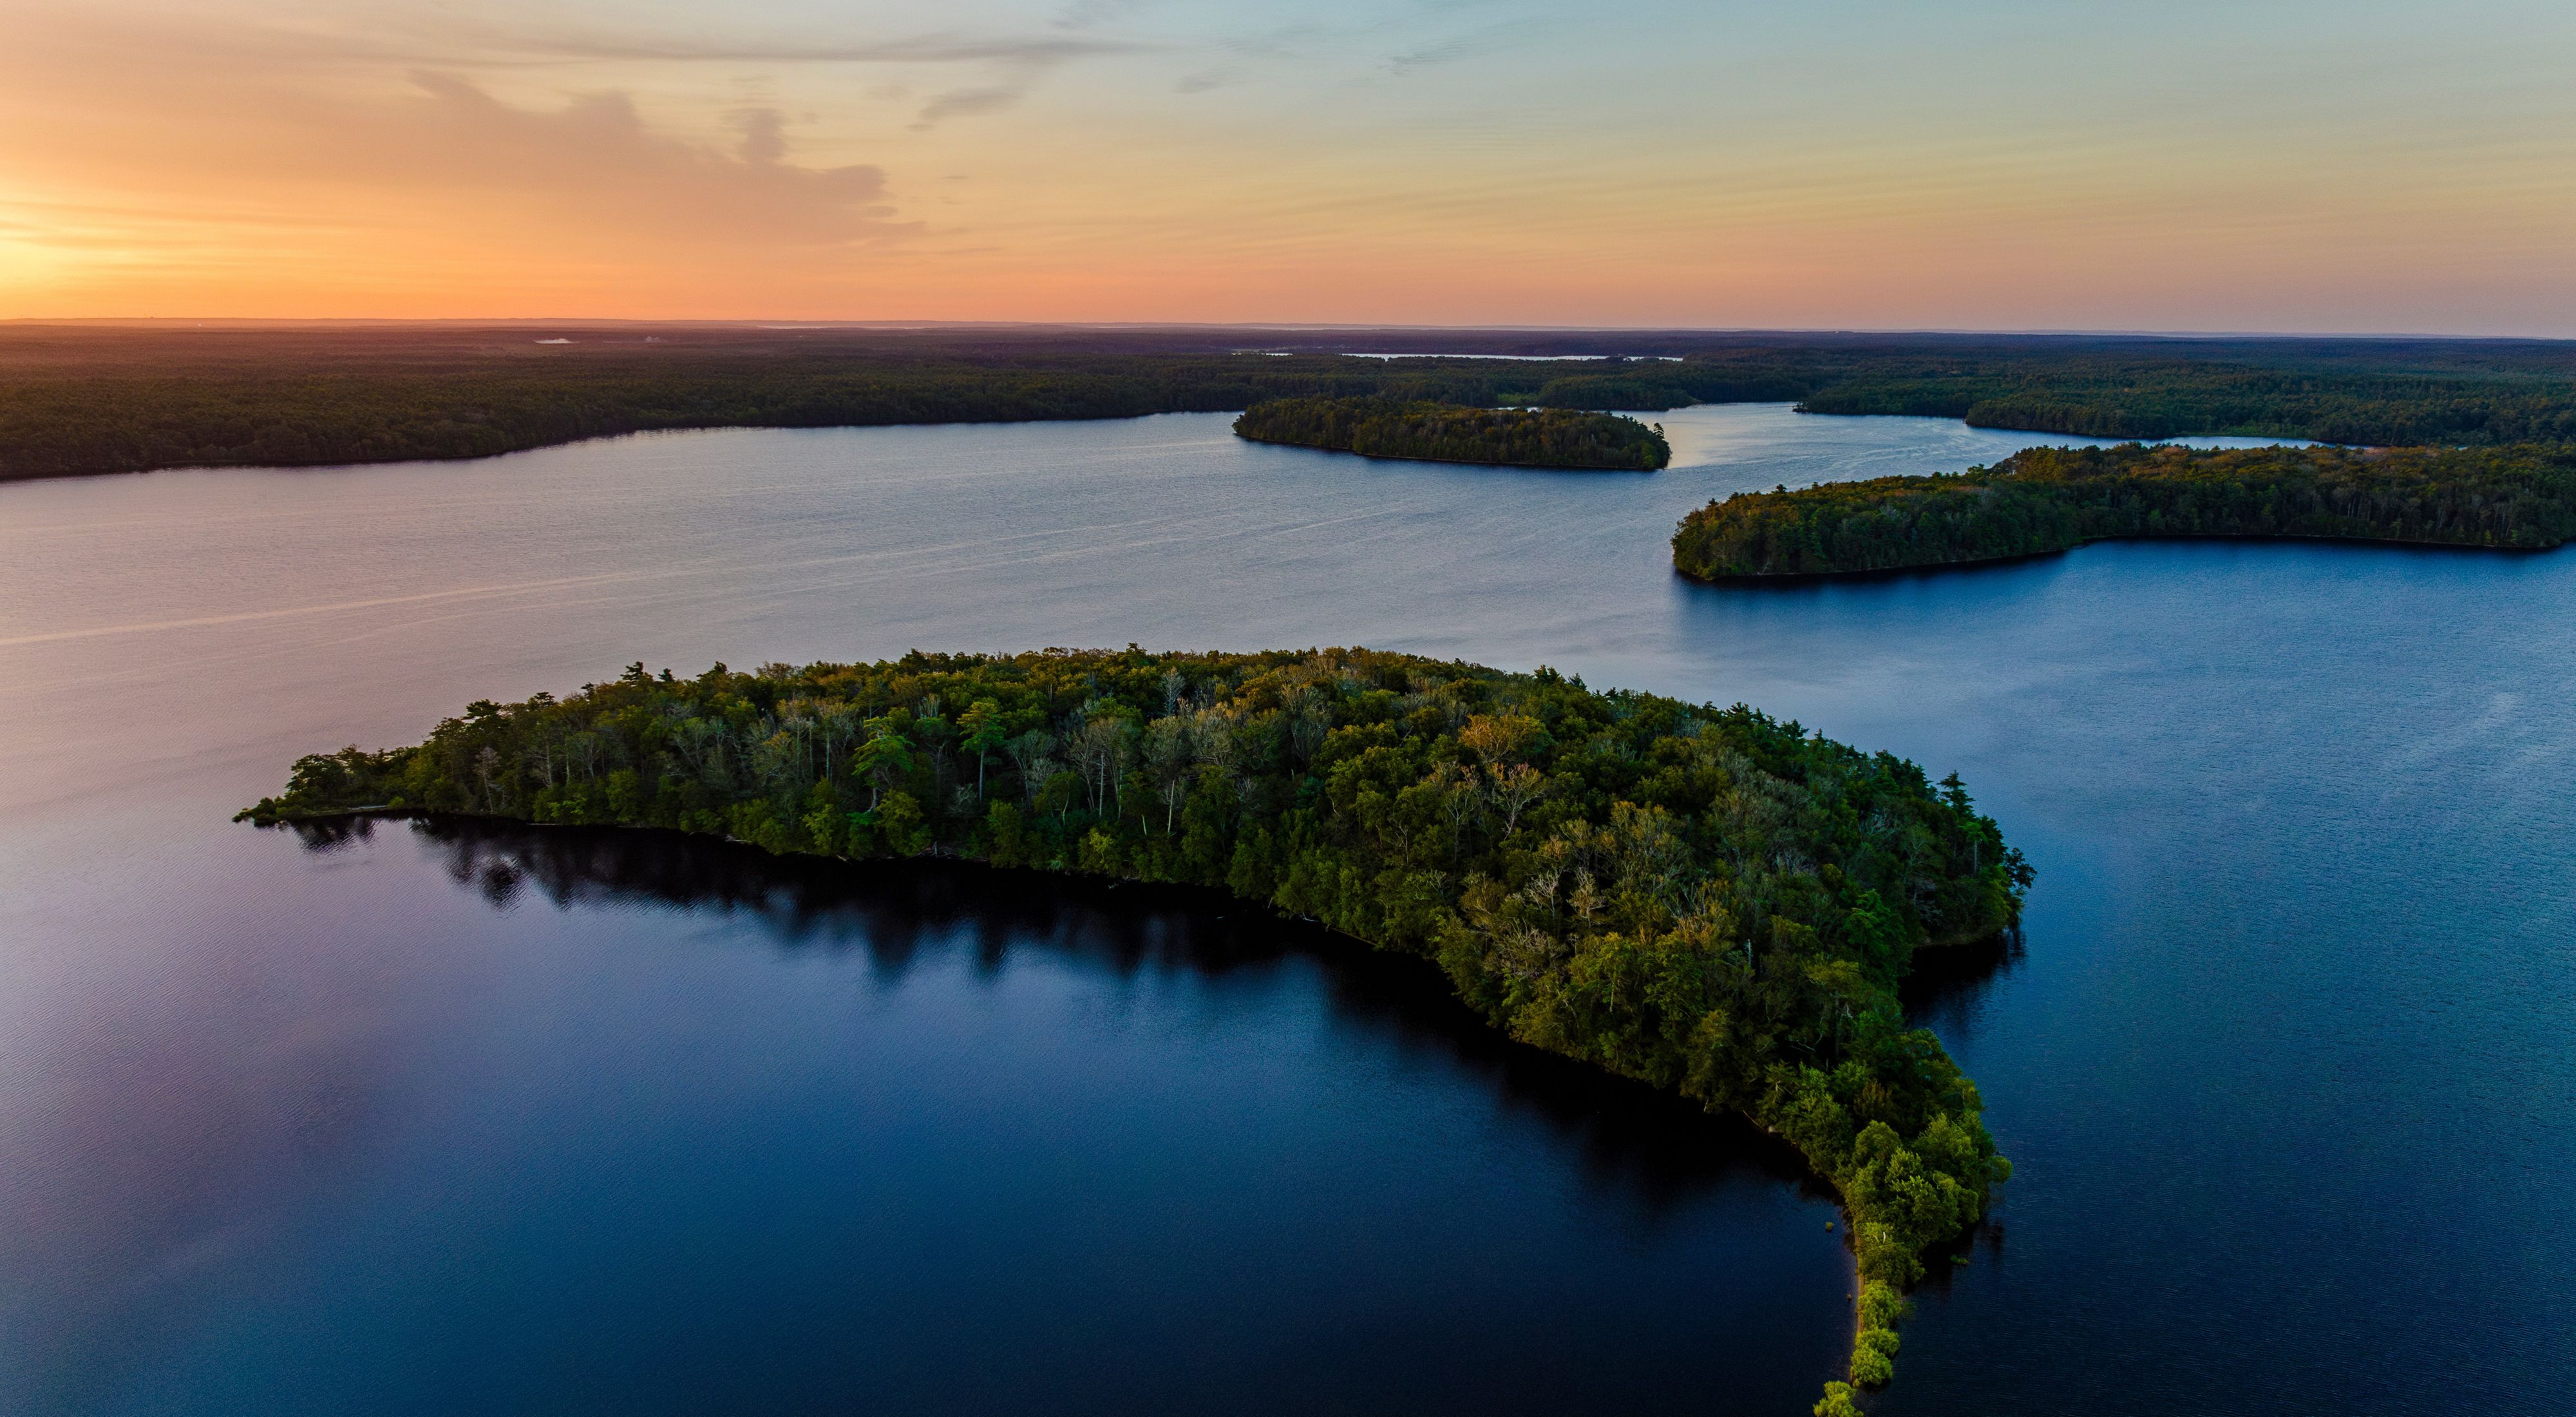 Aerial view of a pond with some islands and shoreline at sunrise